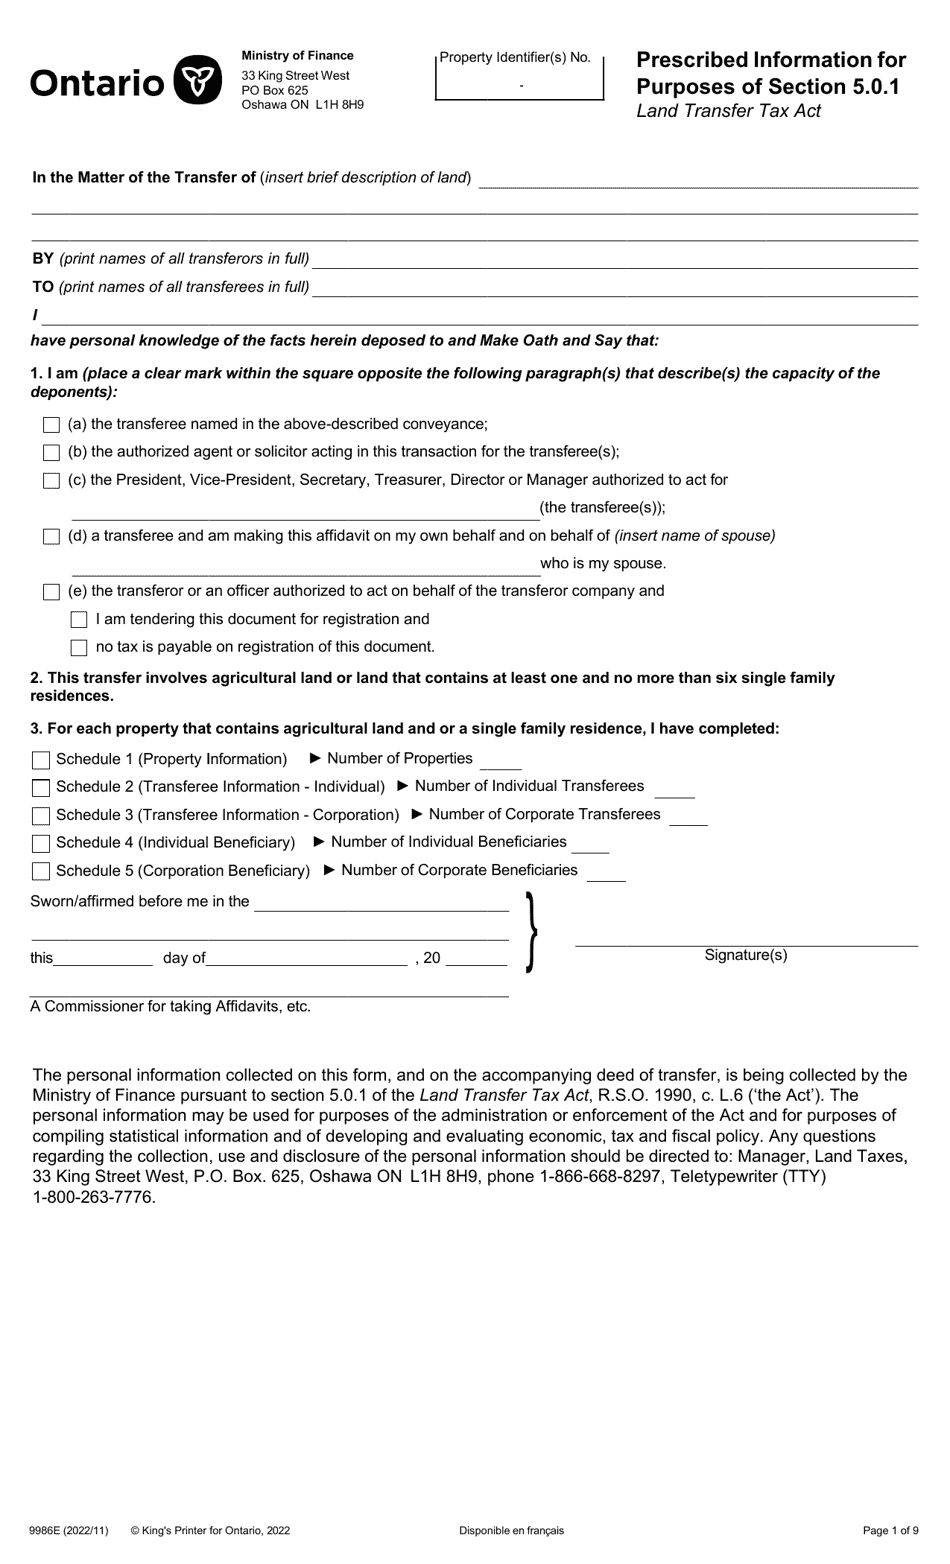 Form 9986E Prescribed Information for Purposes of Section 5.0.1 - Ontario, Canada, Page 1